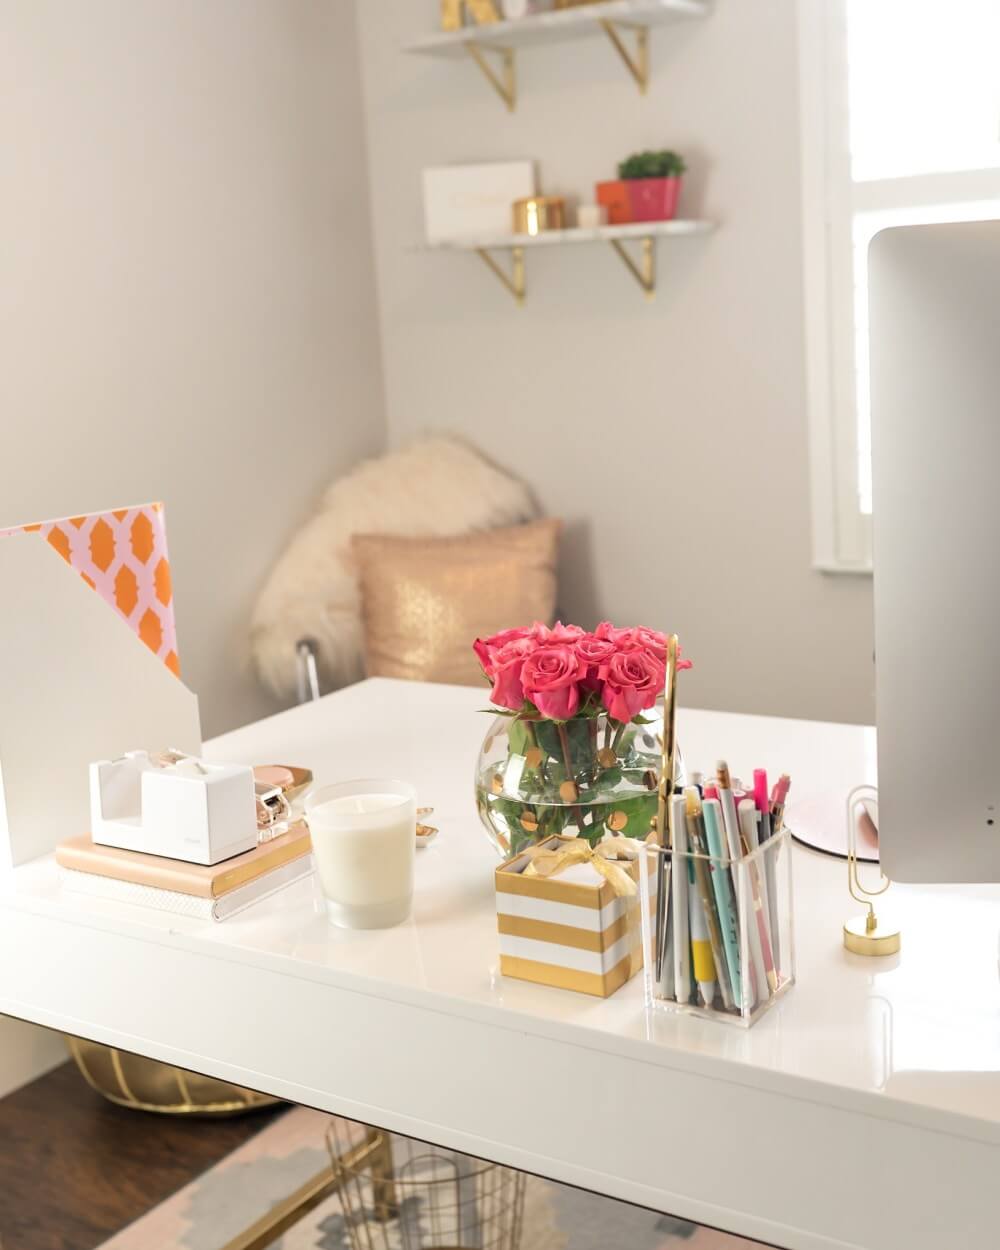 Modern Eclectic Desktop Storage and Fresh Flowers